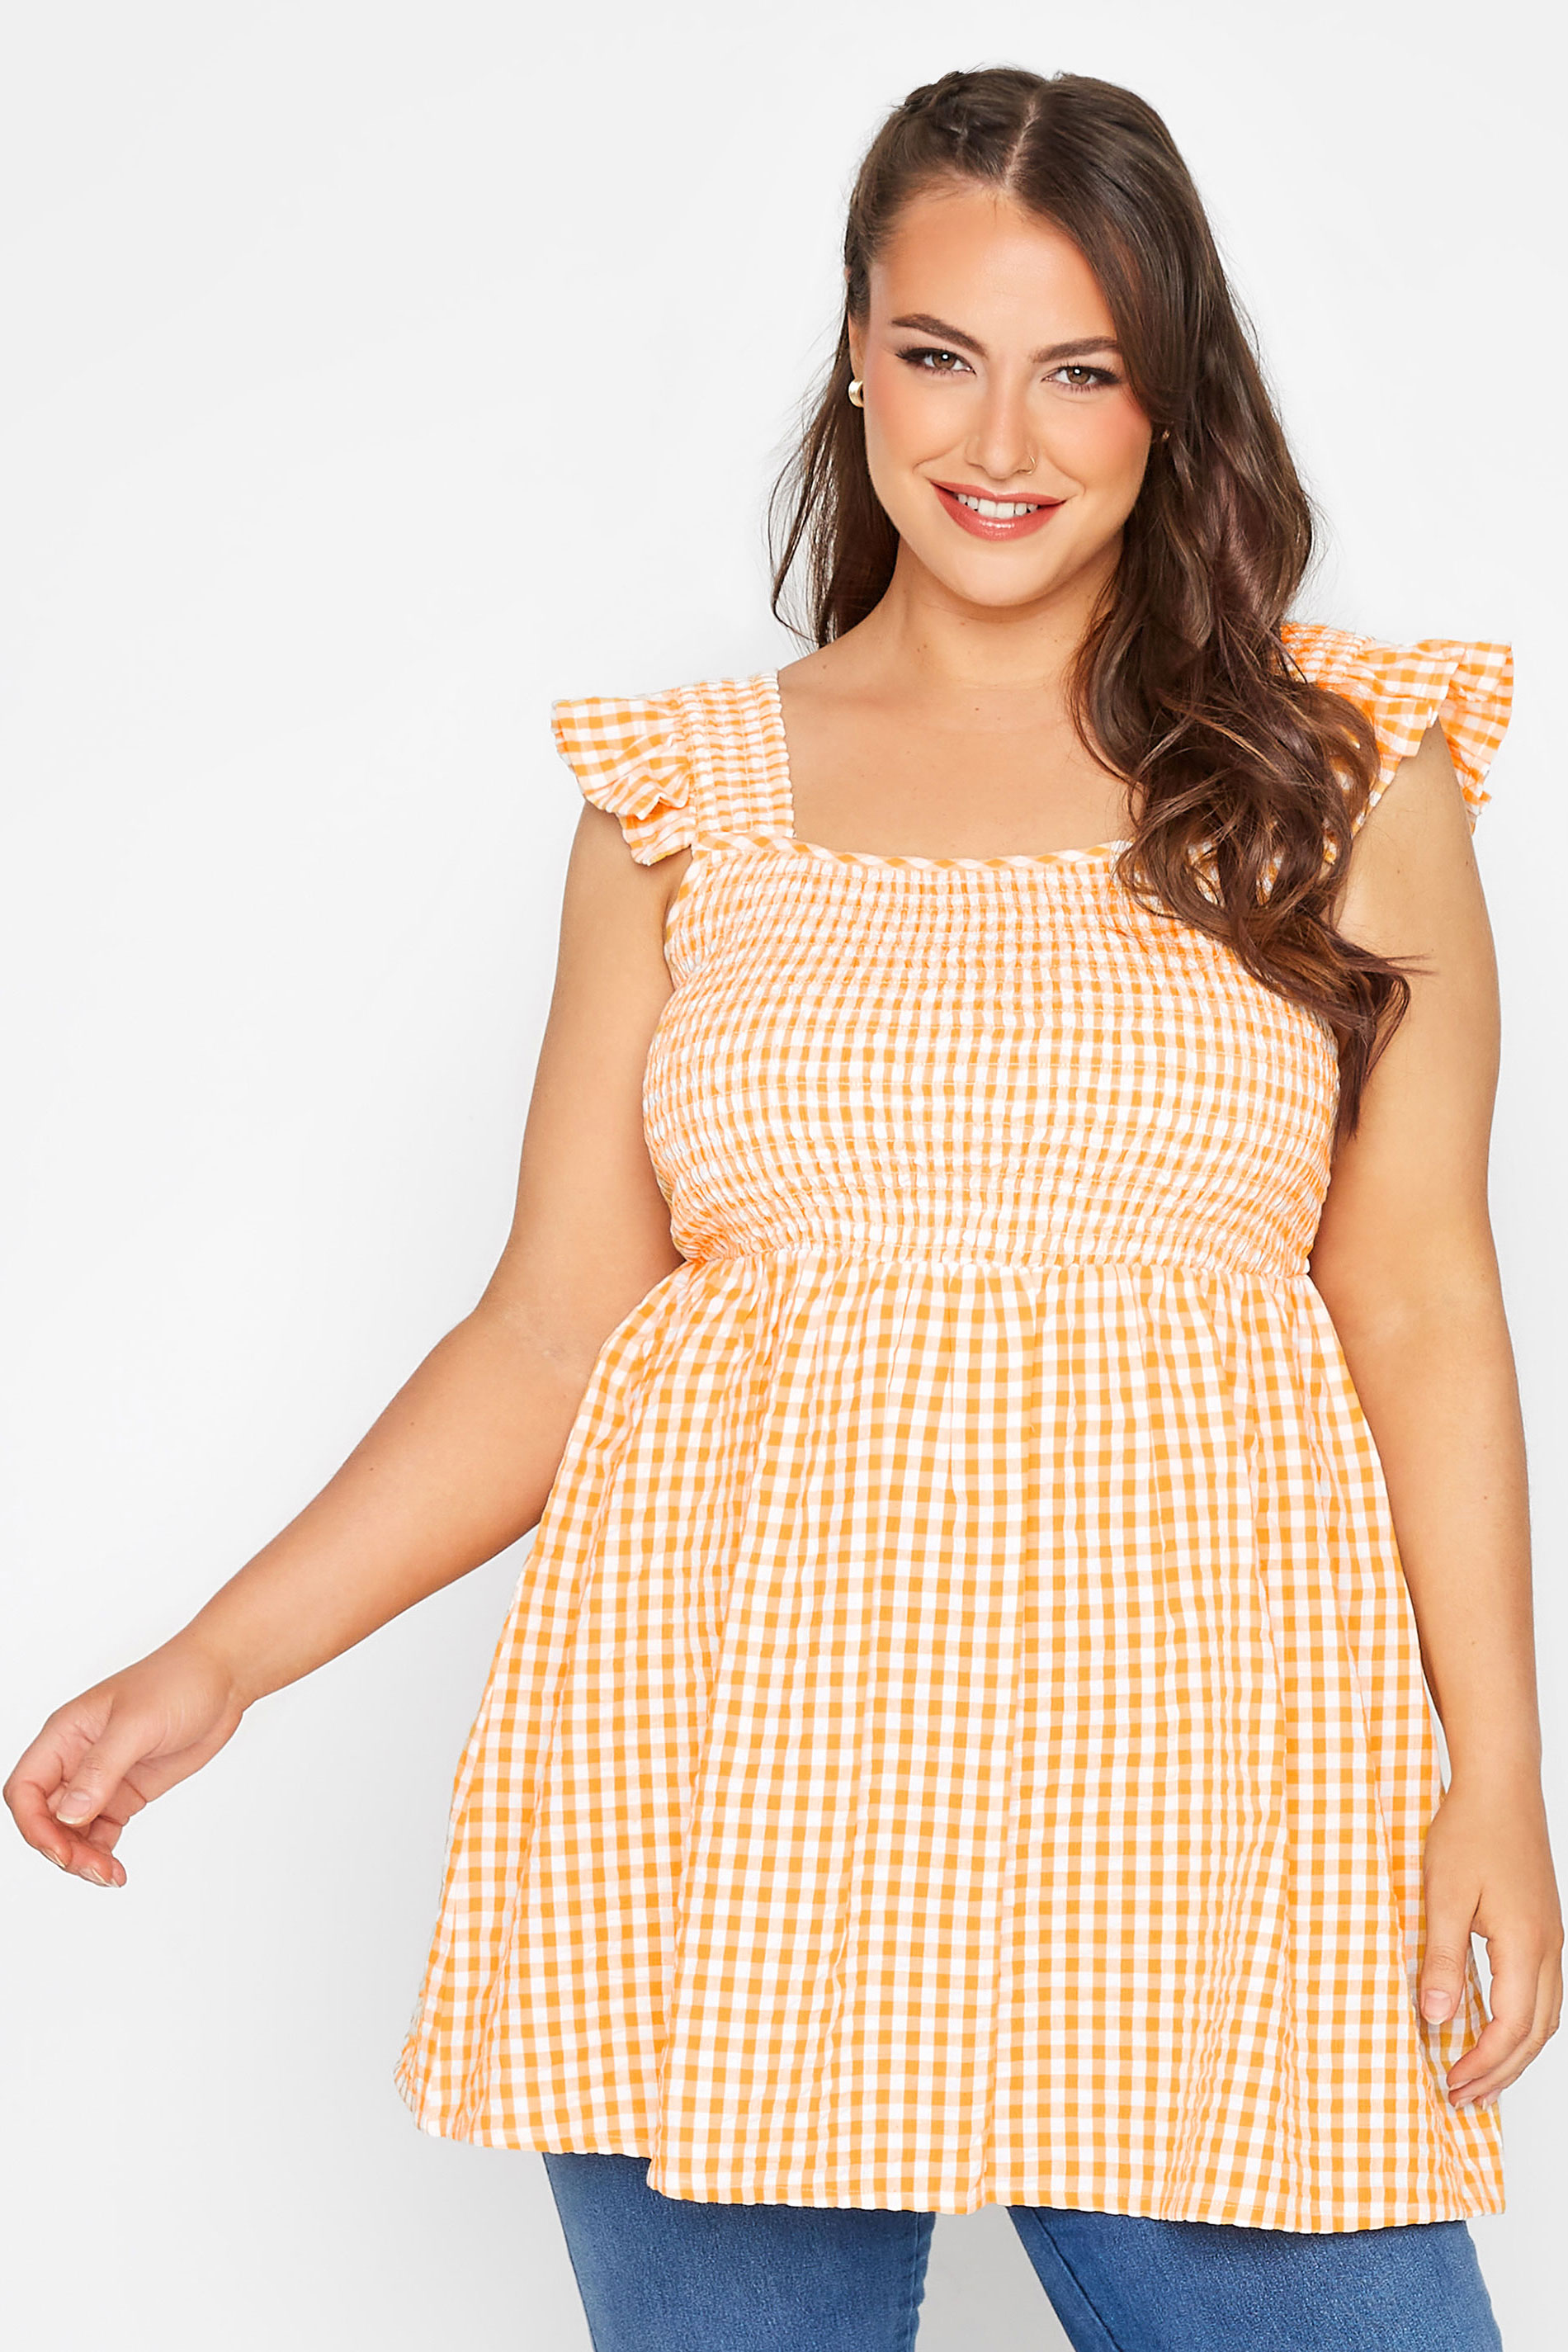 LIMITED COLLECTION Curve Yellow Gingham Frill Top_A.jpg